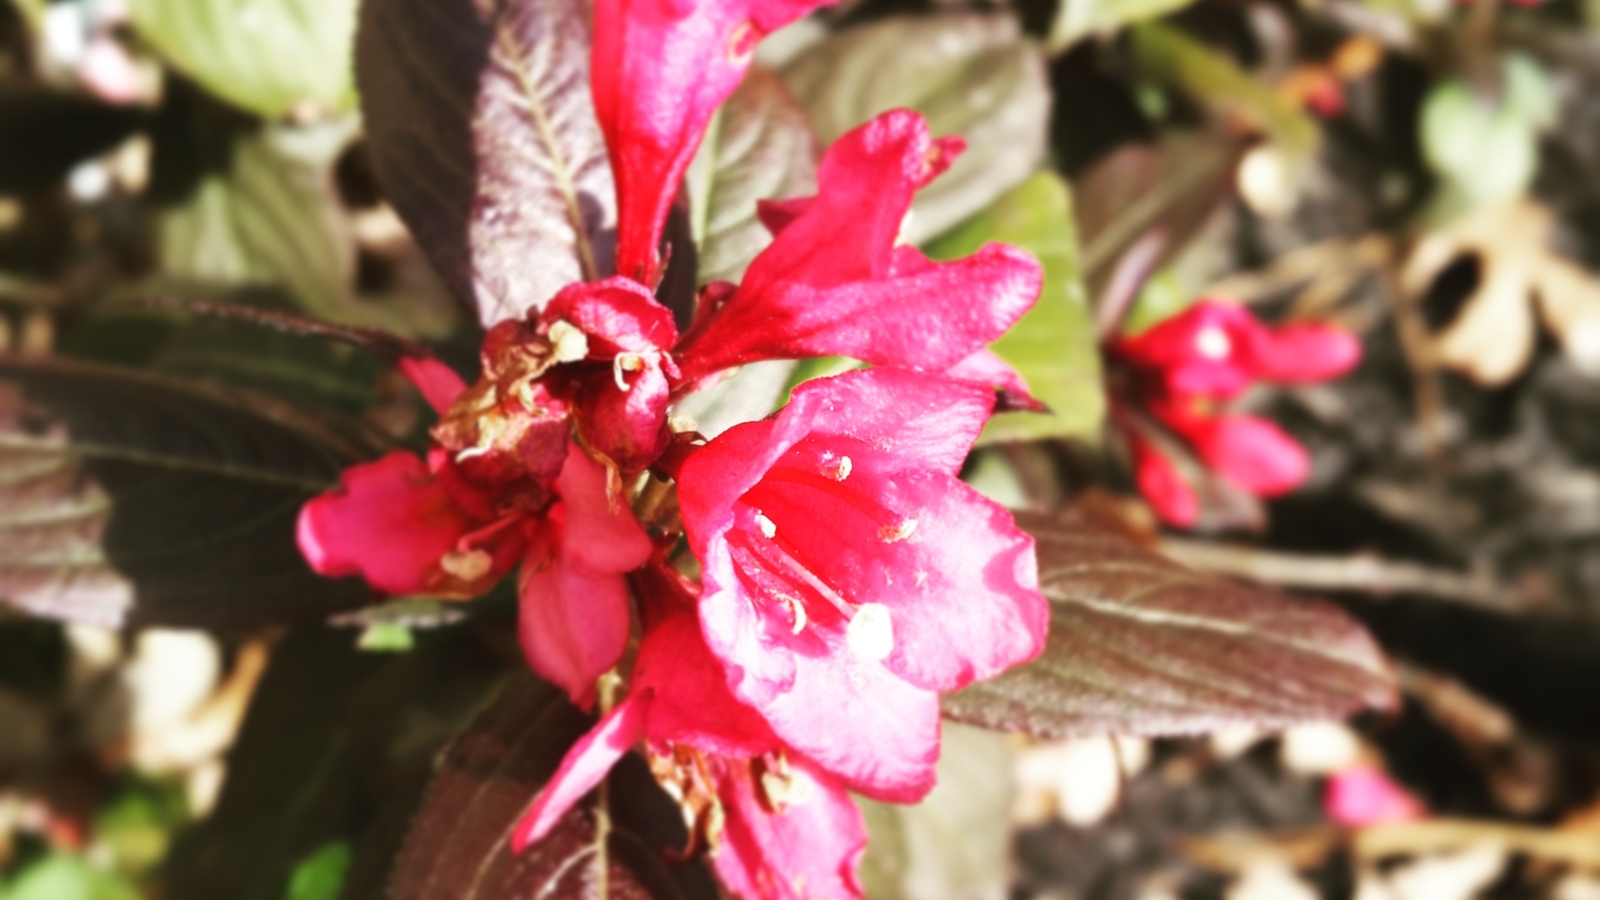 A close-up of vibrant pink ‘Vinho Verde’ weigela flowers nestled among brown leaves, bathed in radiant sunlight, showcasing their delicate hues in full bloom.
